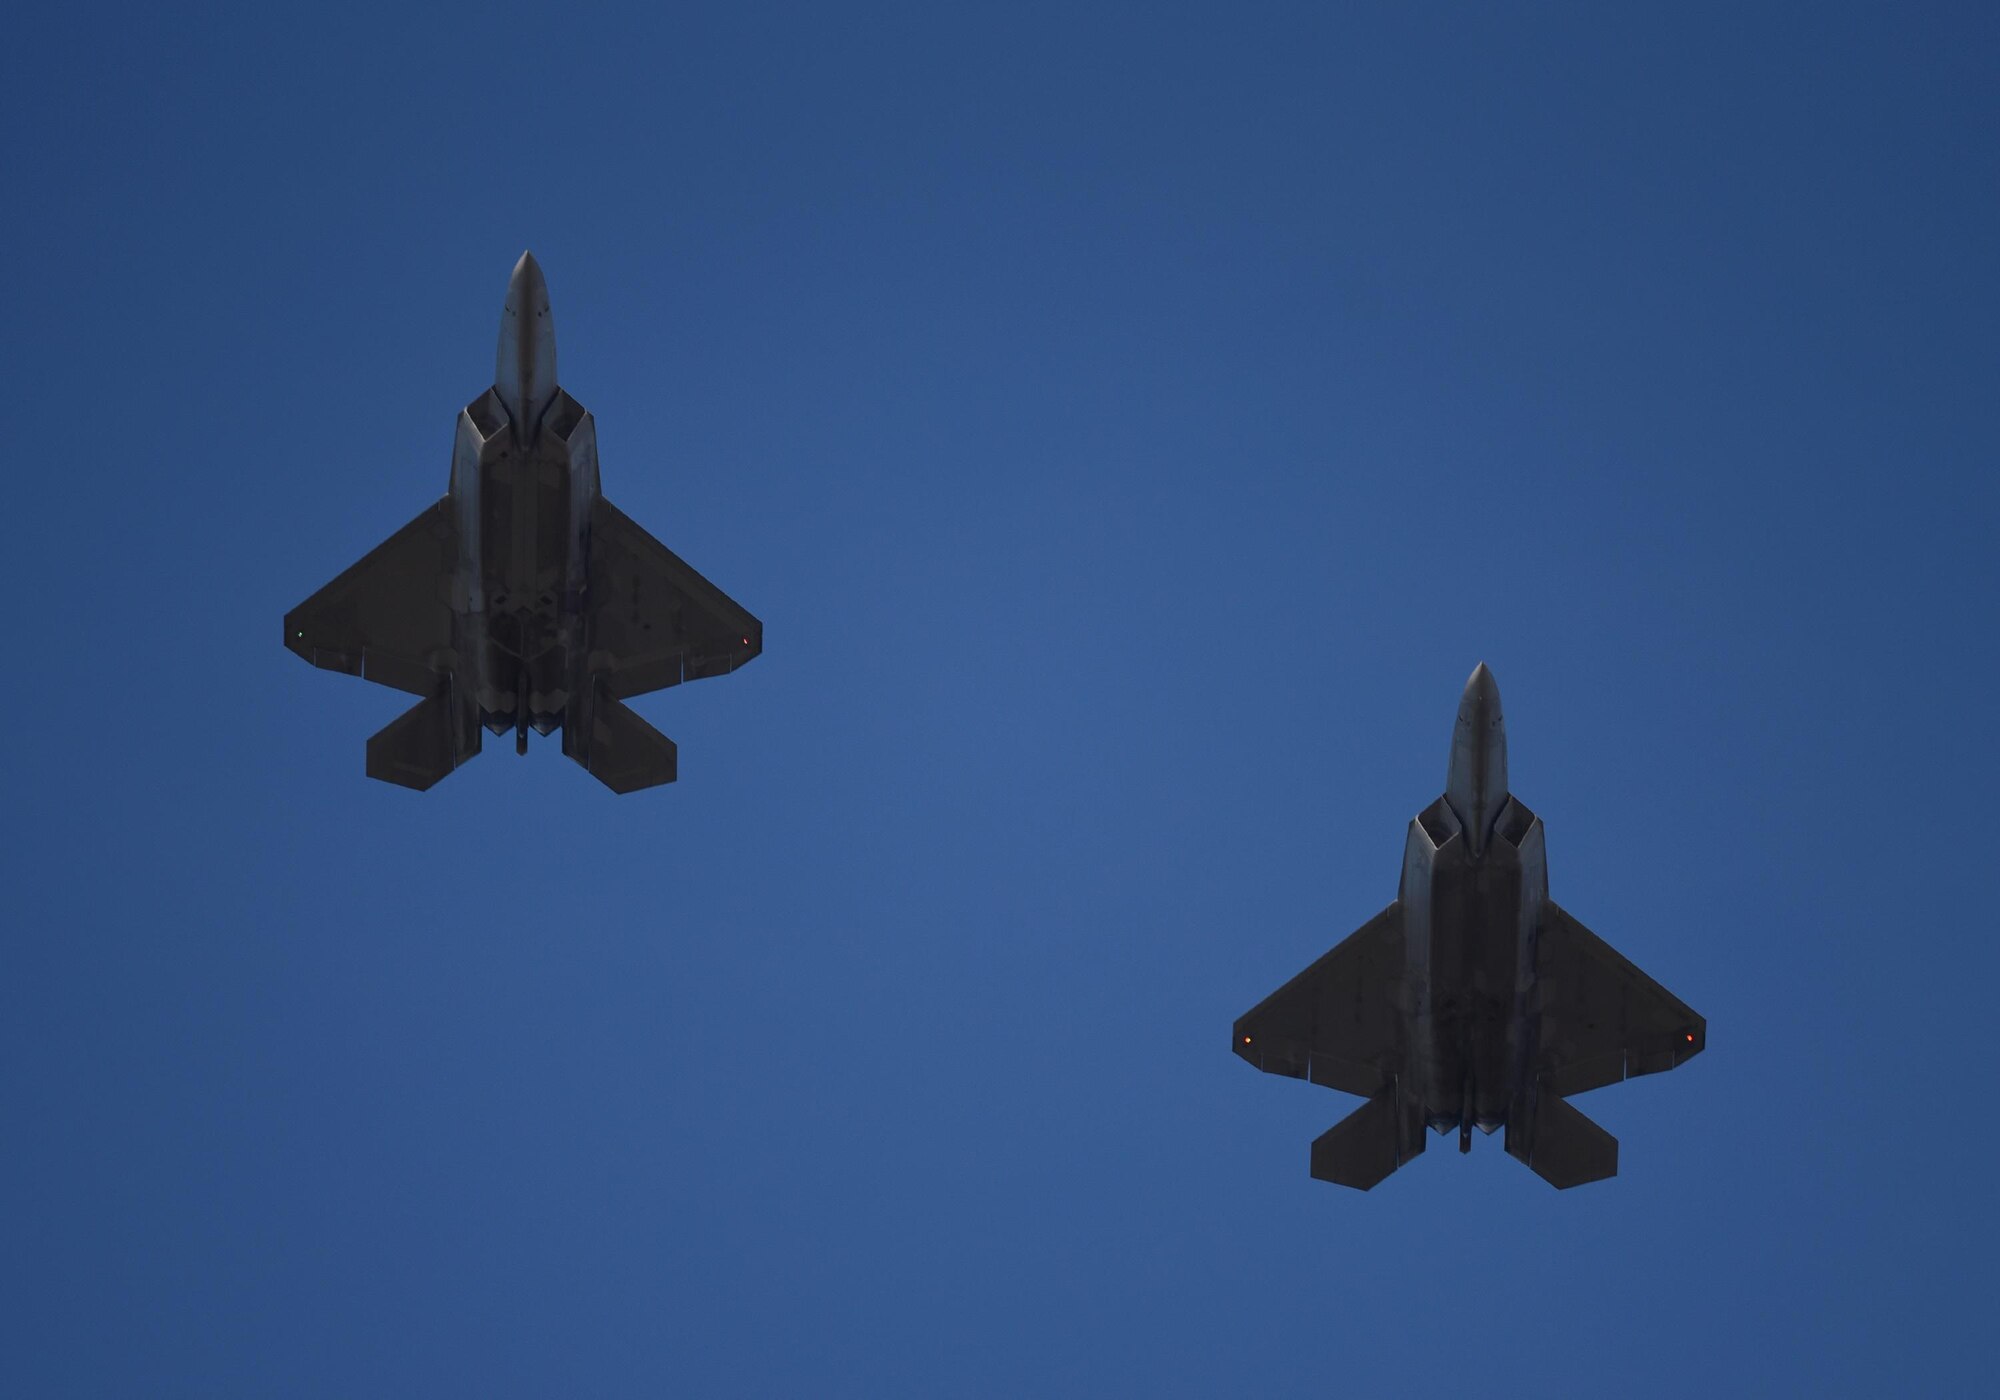 Two U.S. Air Force F-22 Raptors from Tyndall Air Force Base, Fla., fly in formation during Checkered Flag 17-1, Dec. 16, 2016. The integration training pilots receive during exercises like Checkered Flag ensure teams of different capabilities can seamlessly integrate and work together in a real-world combat situation utilizing fifth- and fourth-generation air assets. (U.S. Air Force photo by Staff Sgt. Alex Fox Echols III/Released)